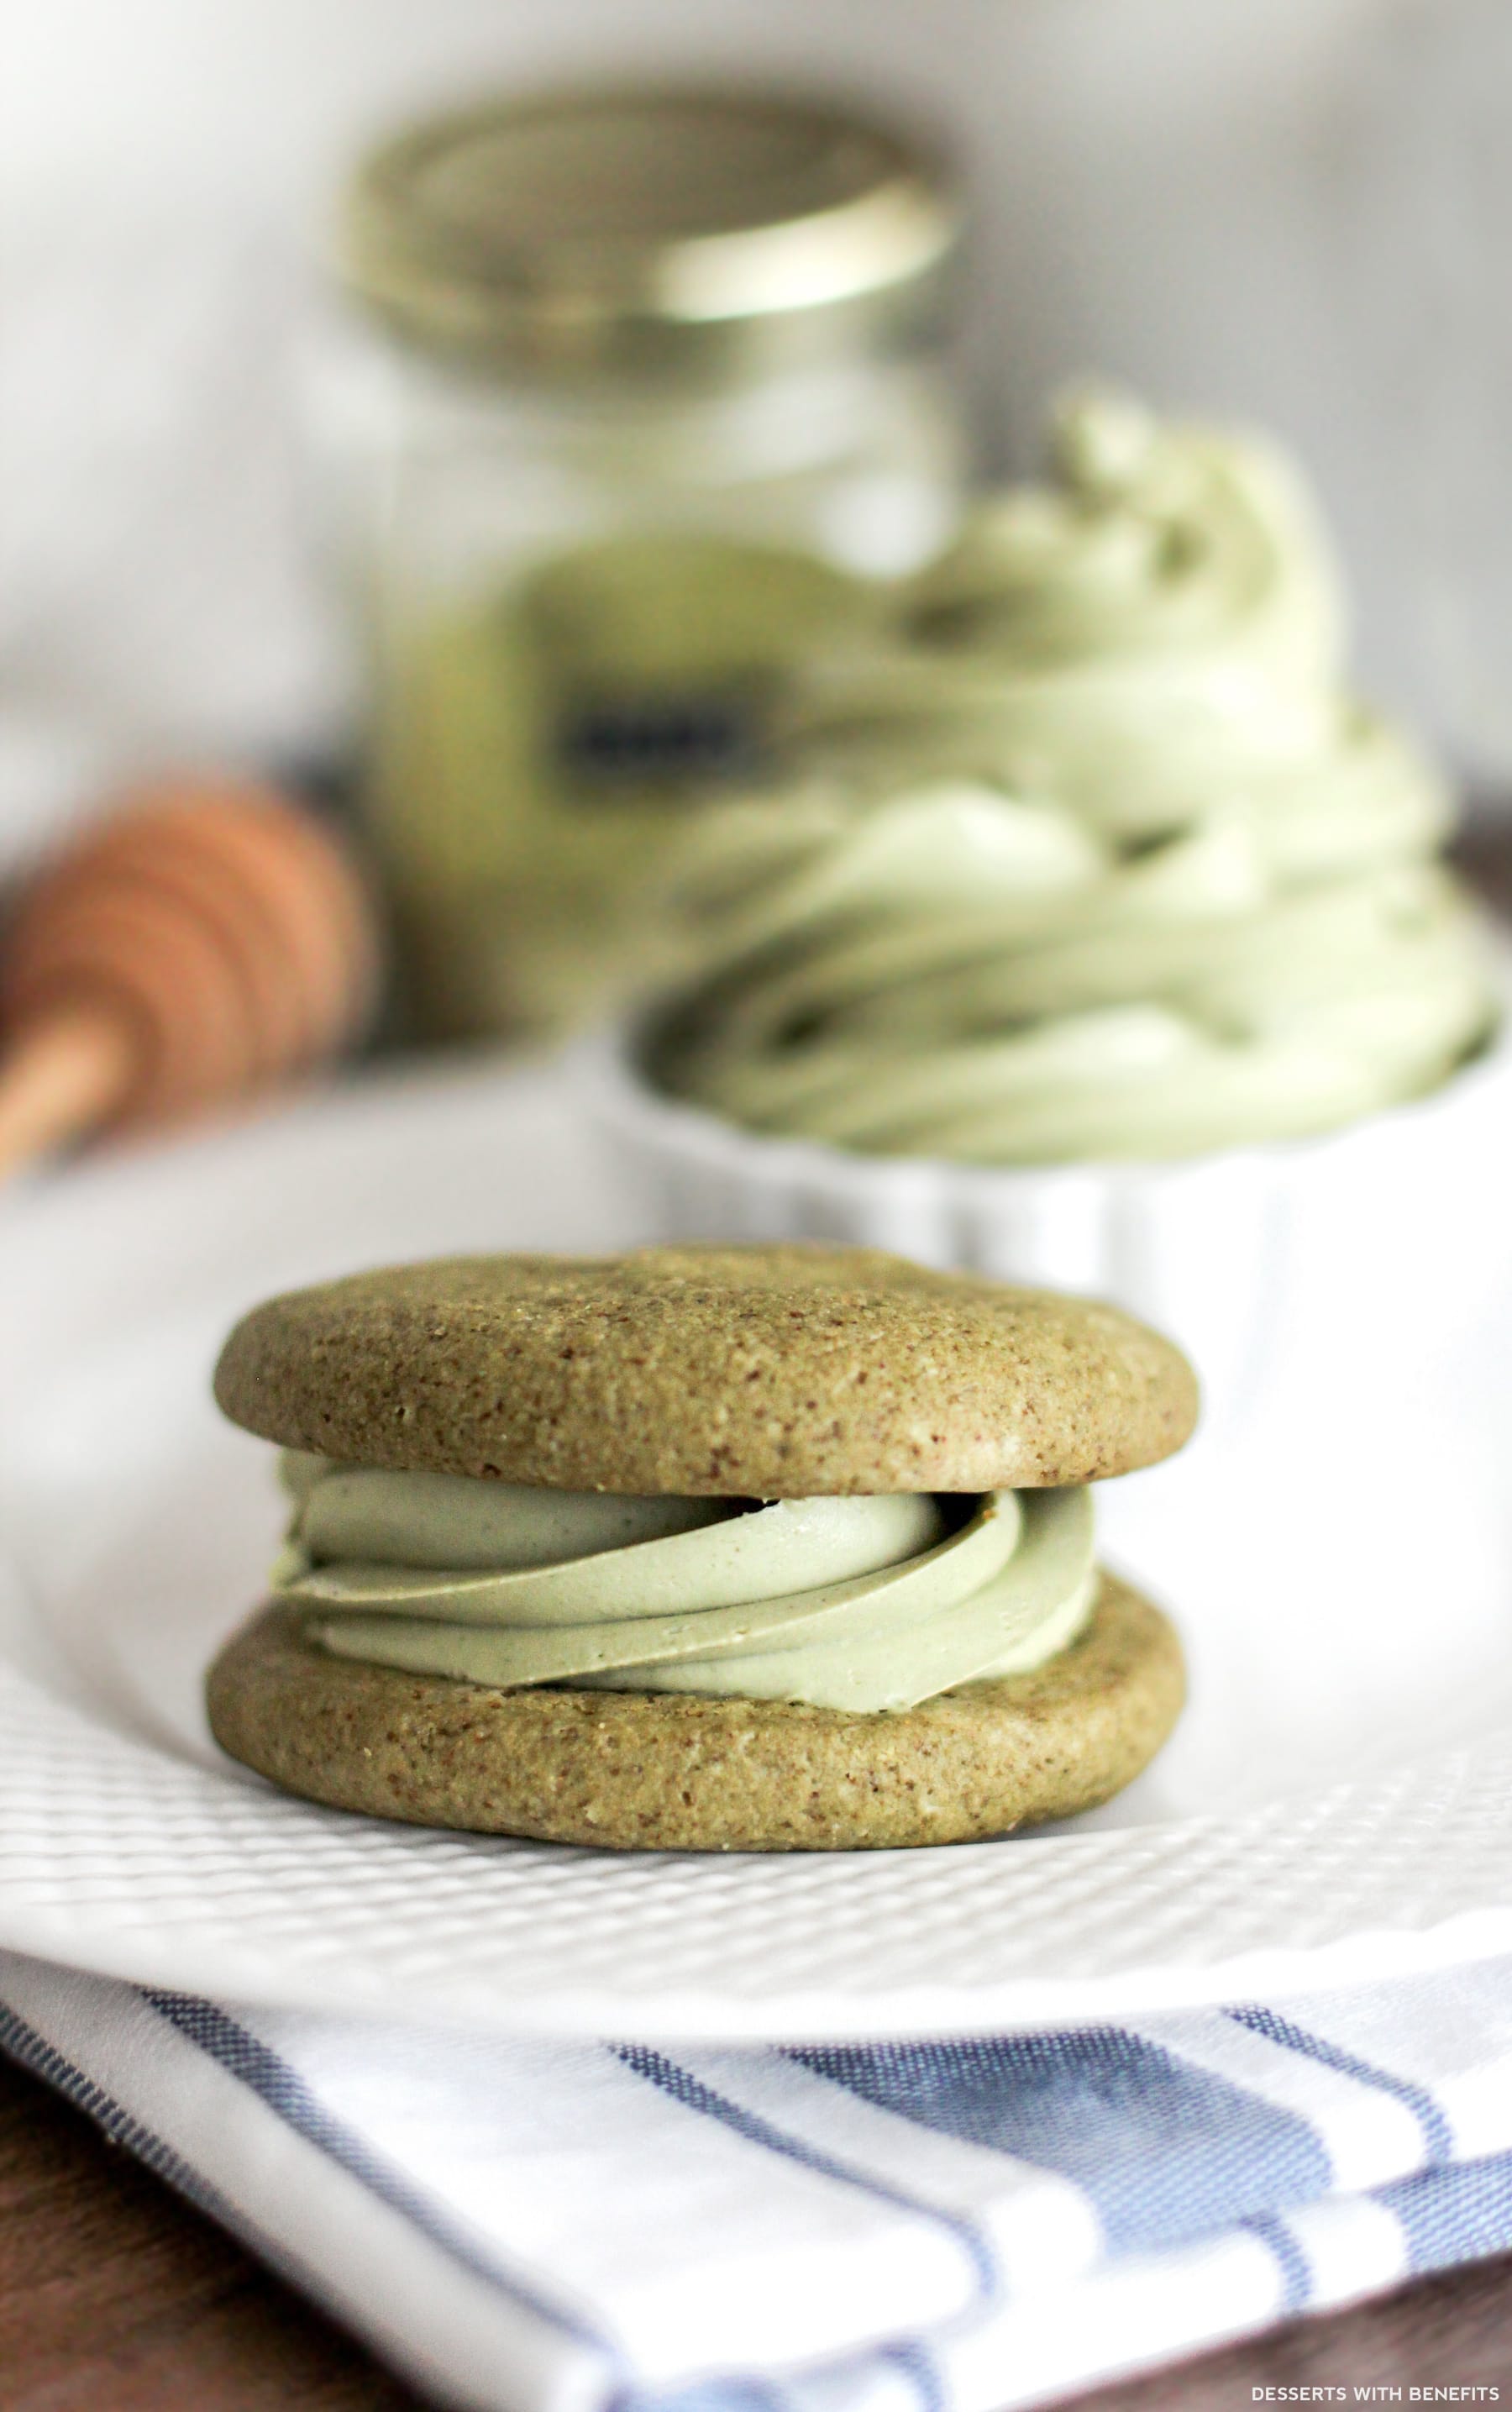 Healthy Matcha Green Tea Cream Cheese Spread (refined sugar free, low carb, gluten free) - Healthy Dessert Recipes at Desserts with Benefits